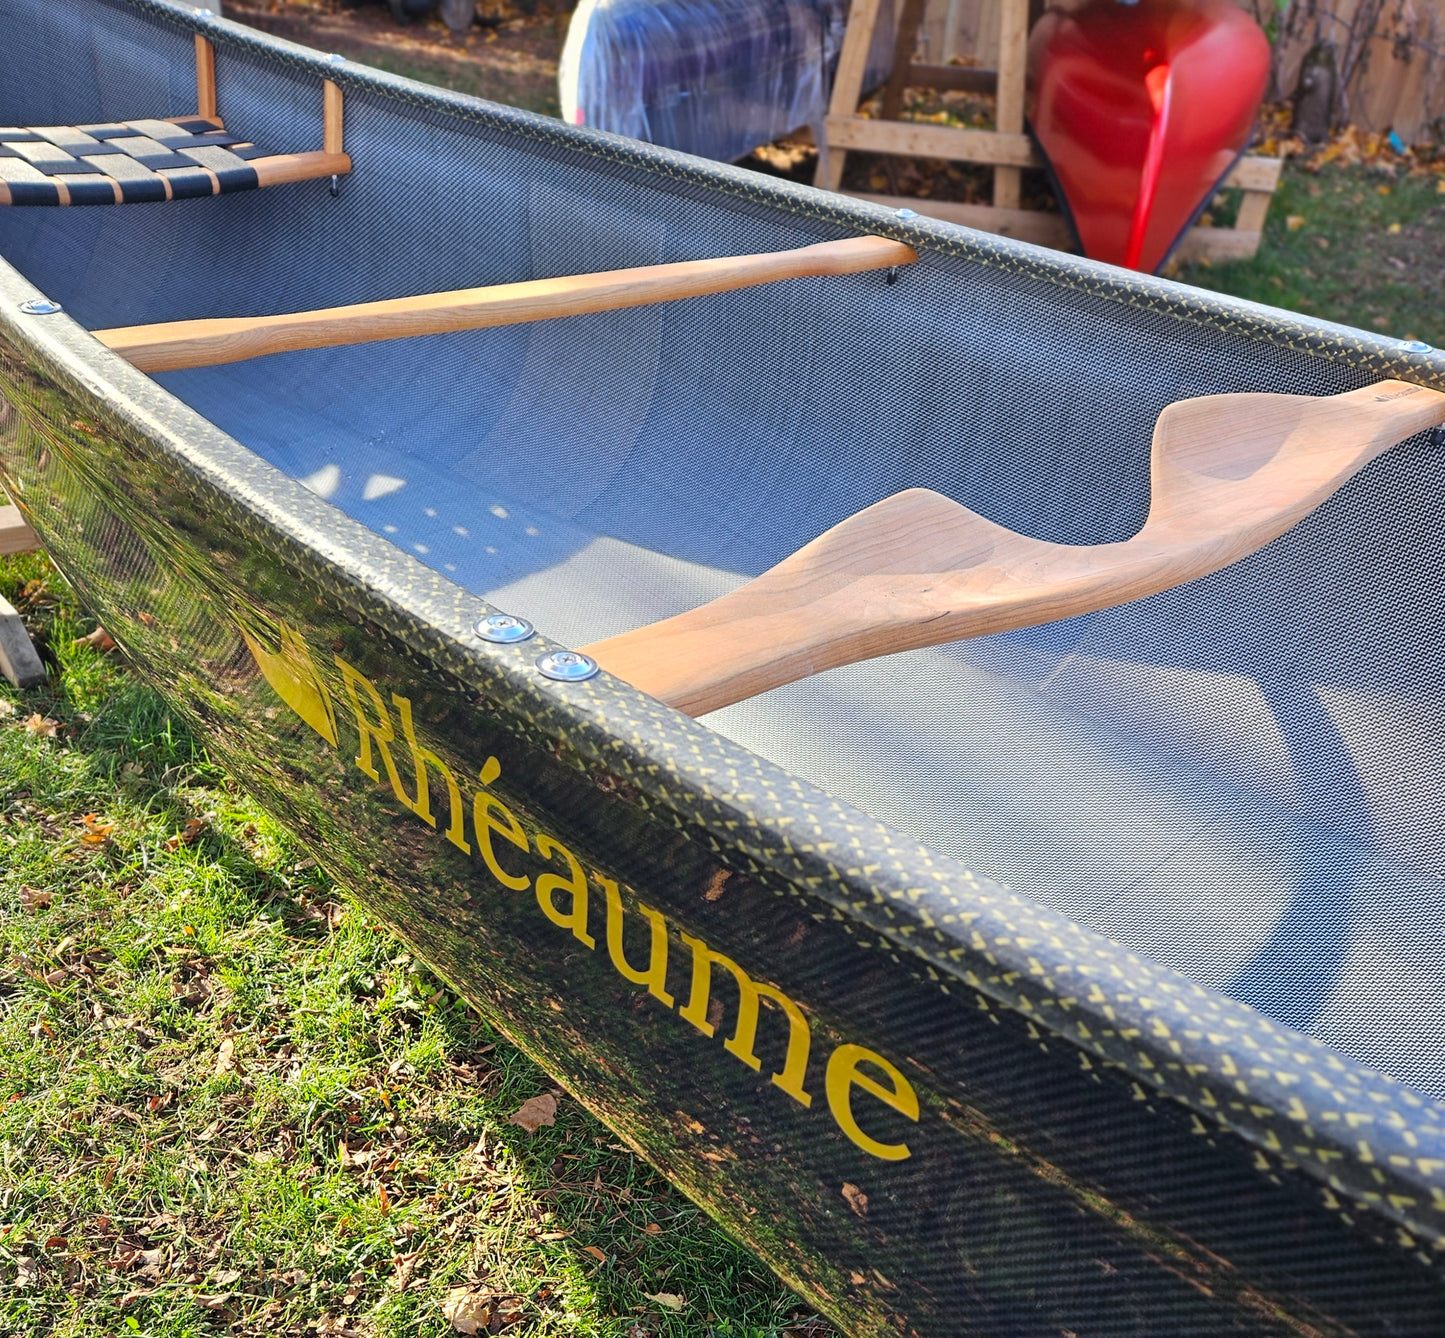 Rheaume Prospector 16'6" Carbon Canoe: Ideal for Diverse Paddling Needs: This canoe's design allows it to adapt to any type of situation, making it suitable for a variety of paddling styles and environments.